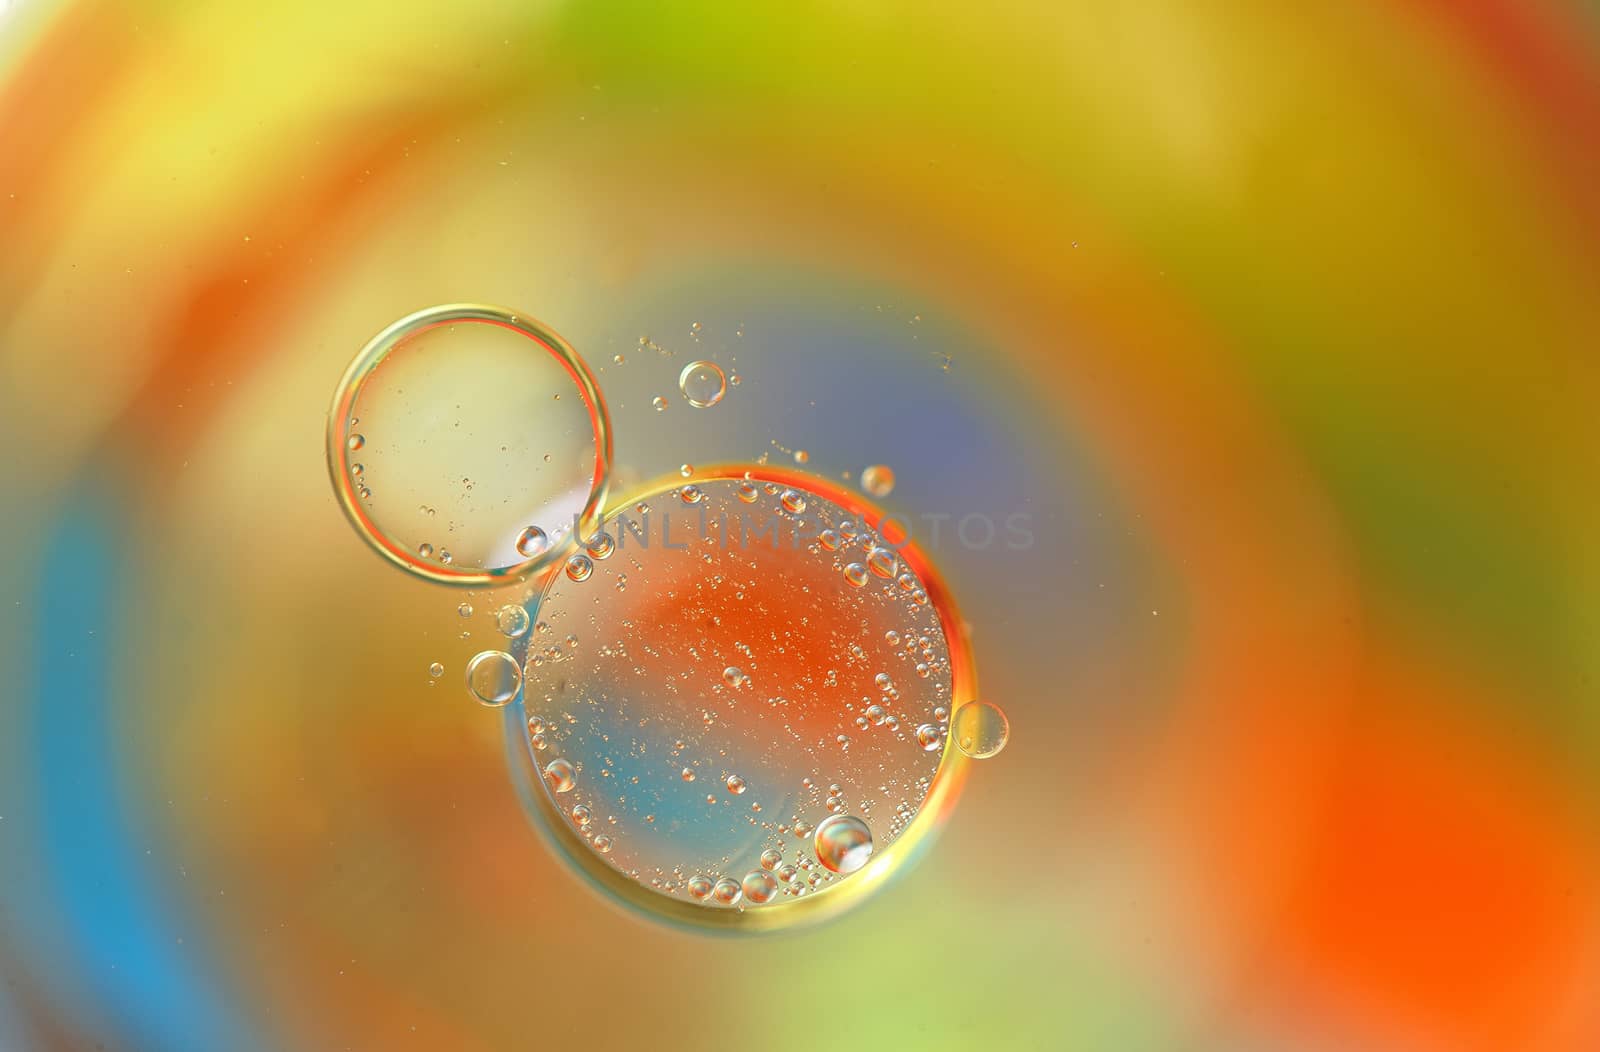 Colrful background with bubbles by mady70